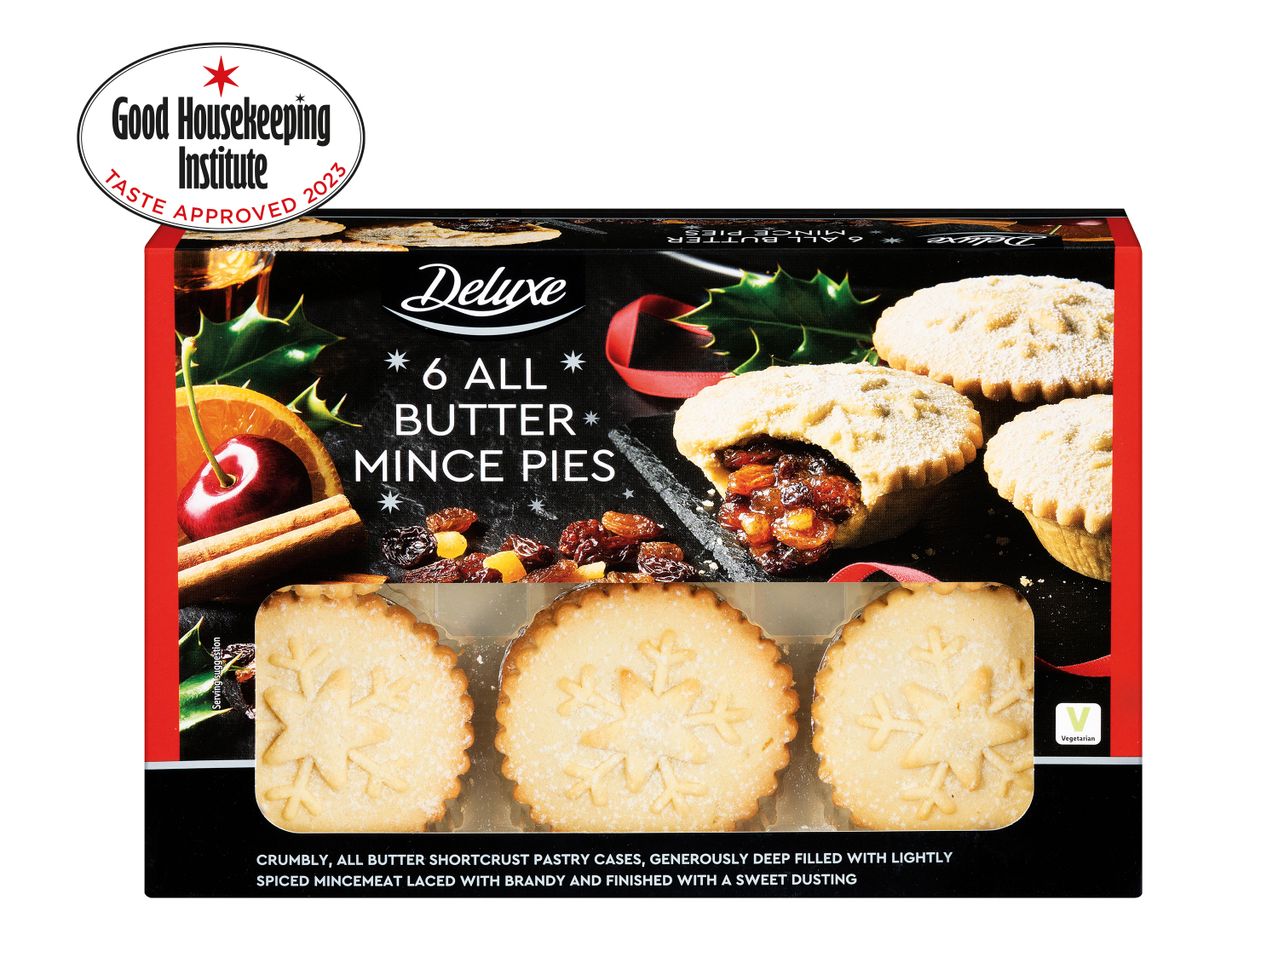 Go to full screen view: Deluxe Luxury Mince Pies - Image 1